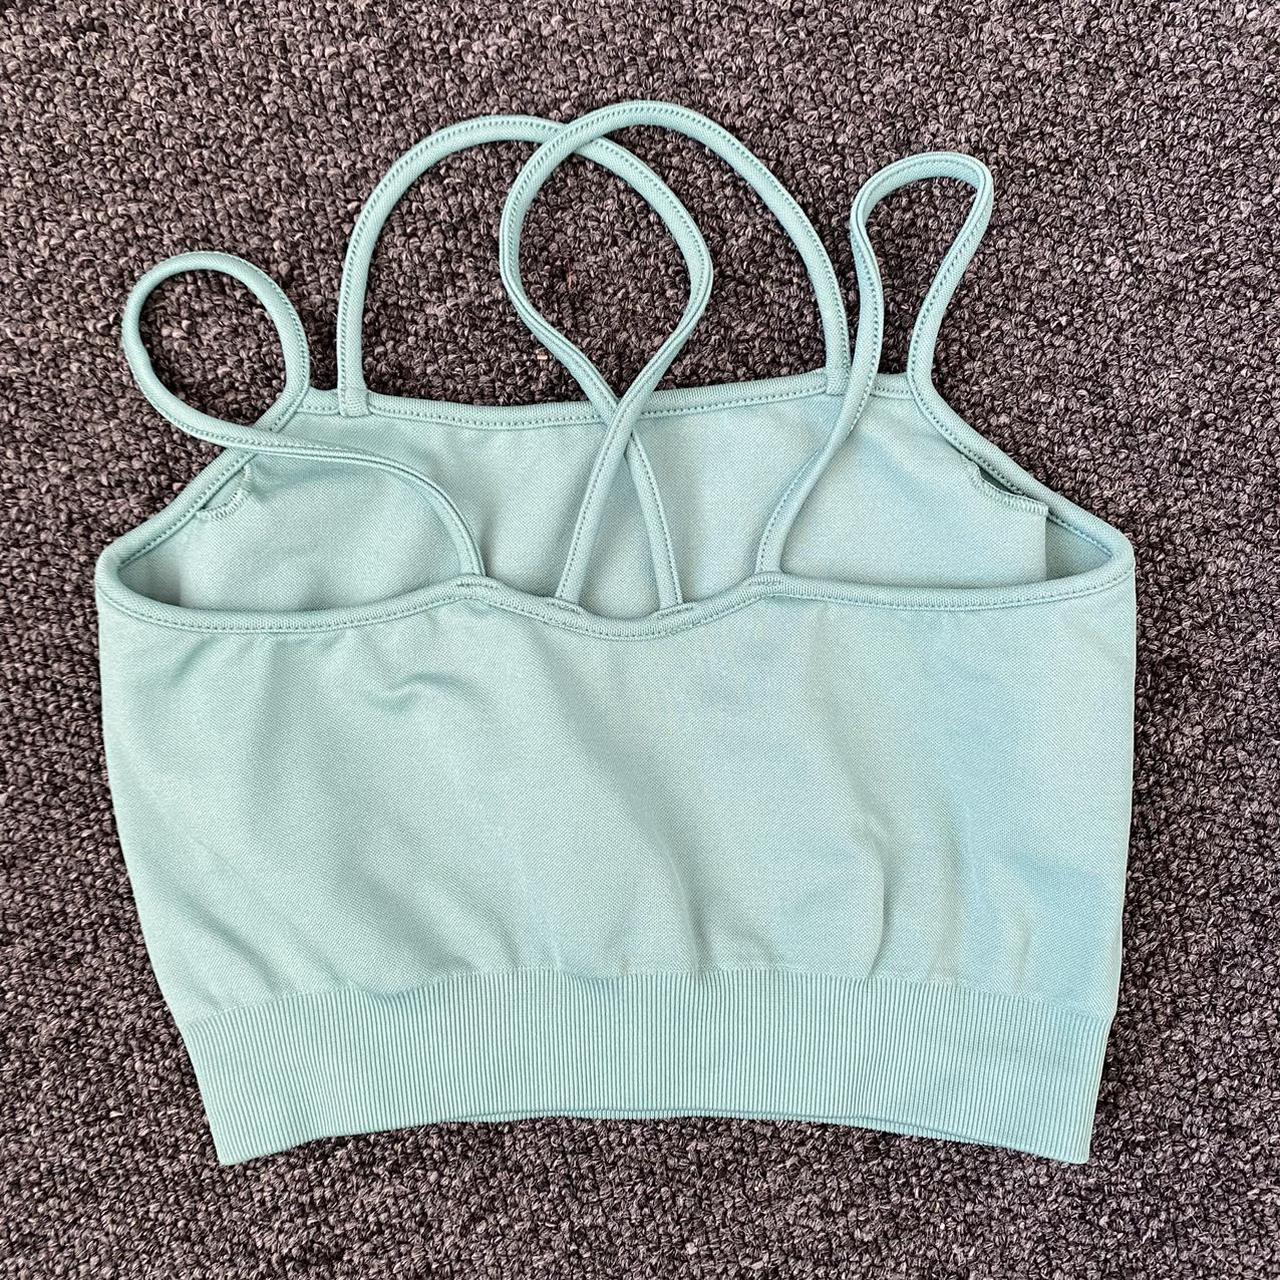 TALA SOLASTA BRA IN SEA Currently SOLD OUT on TALA - Depop